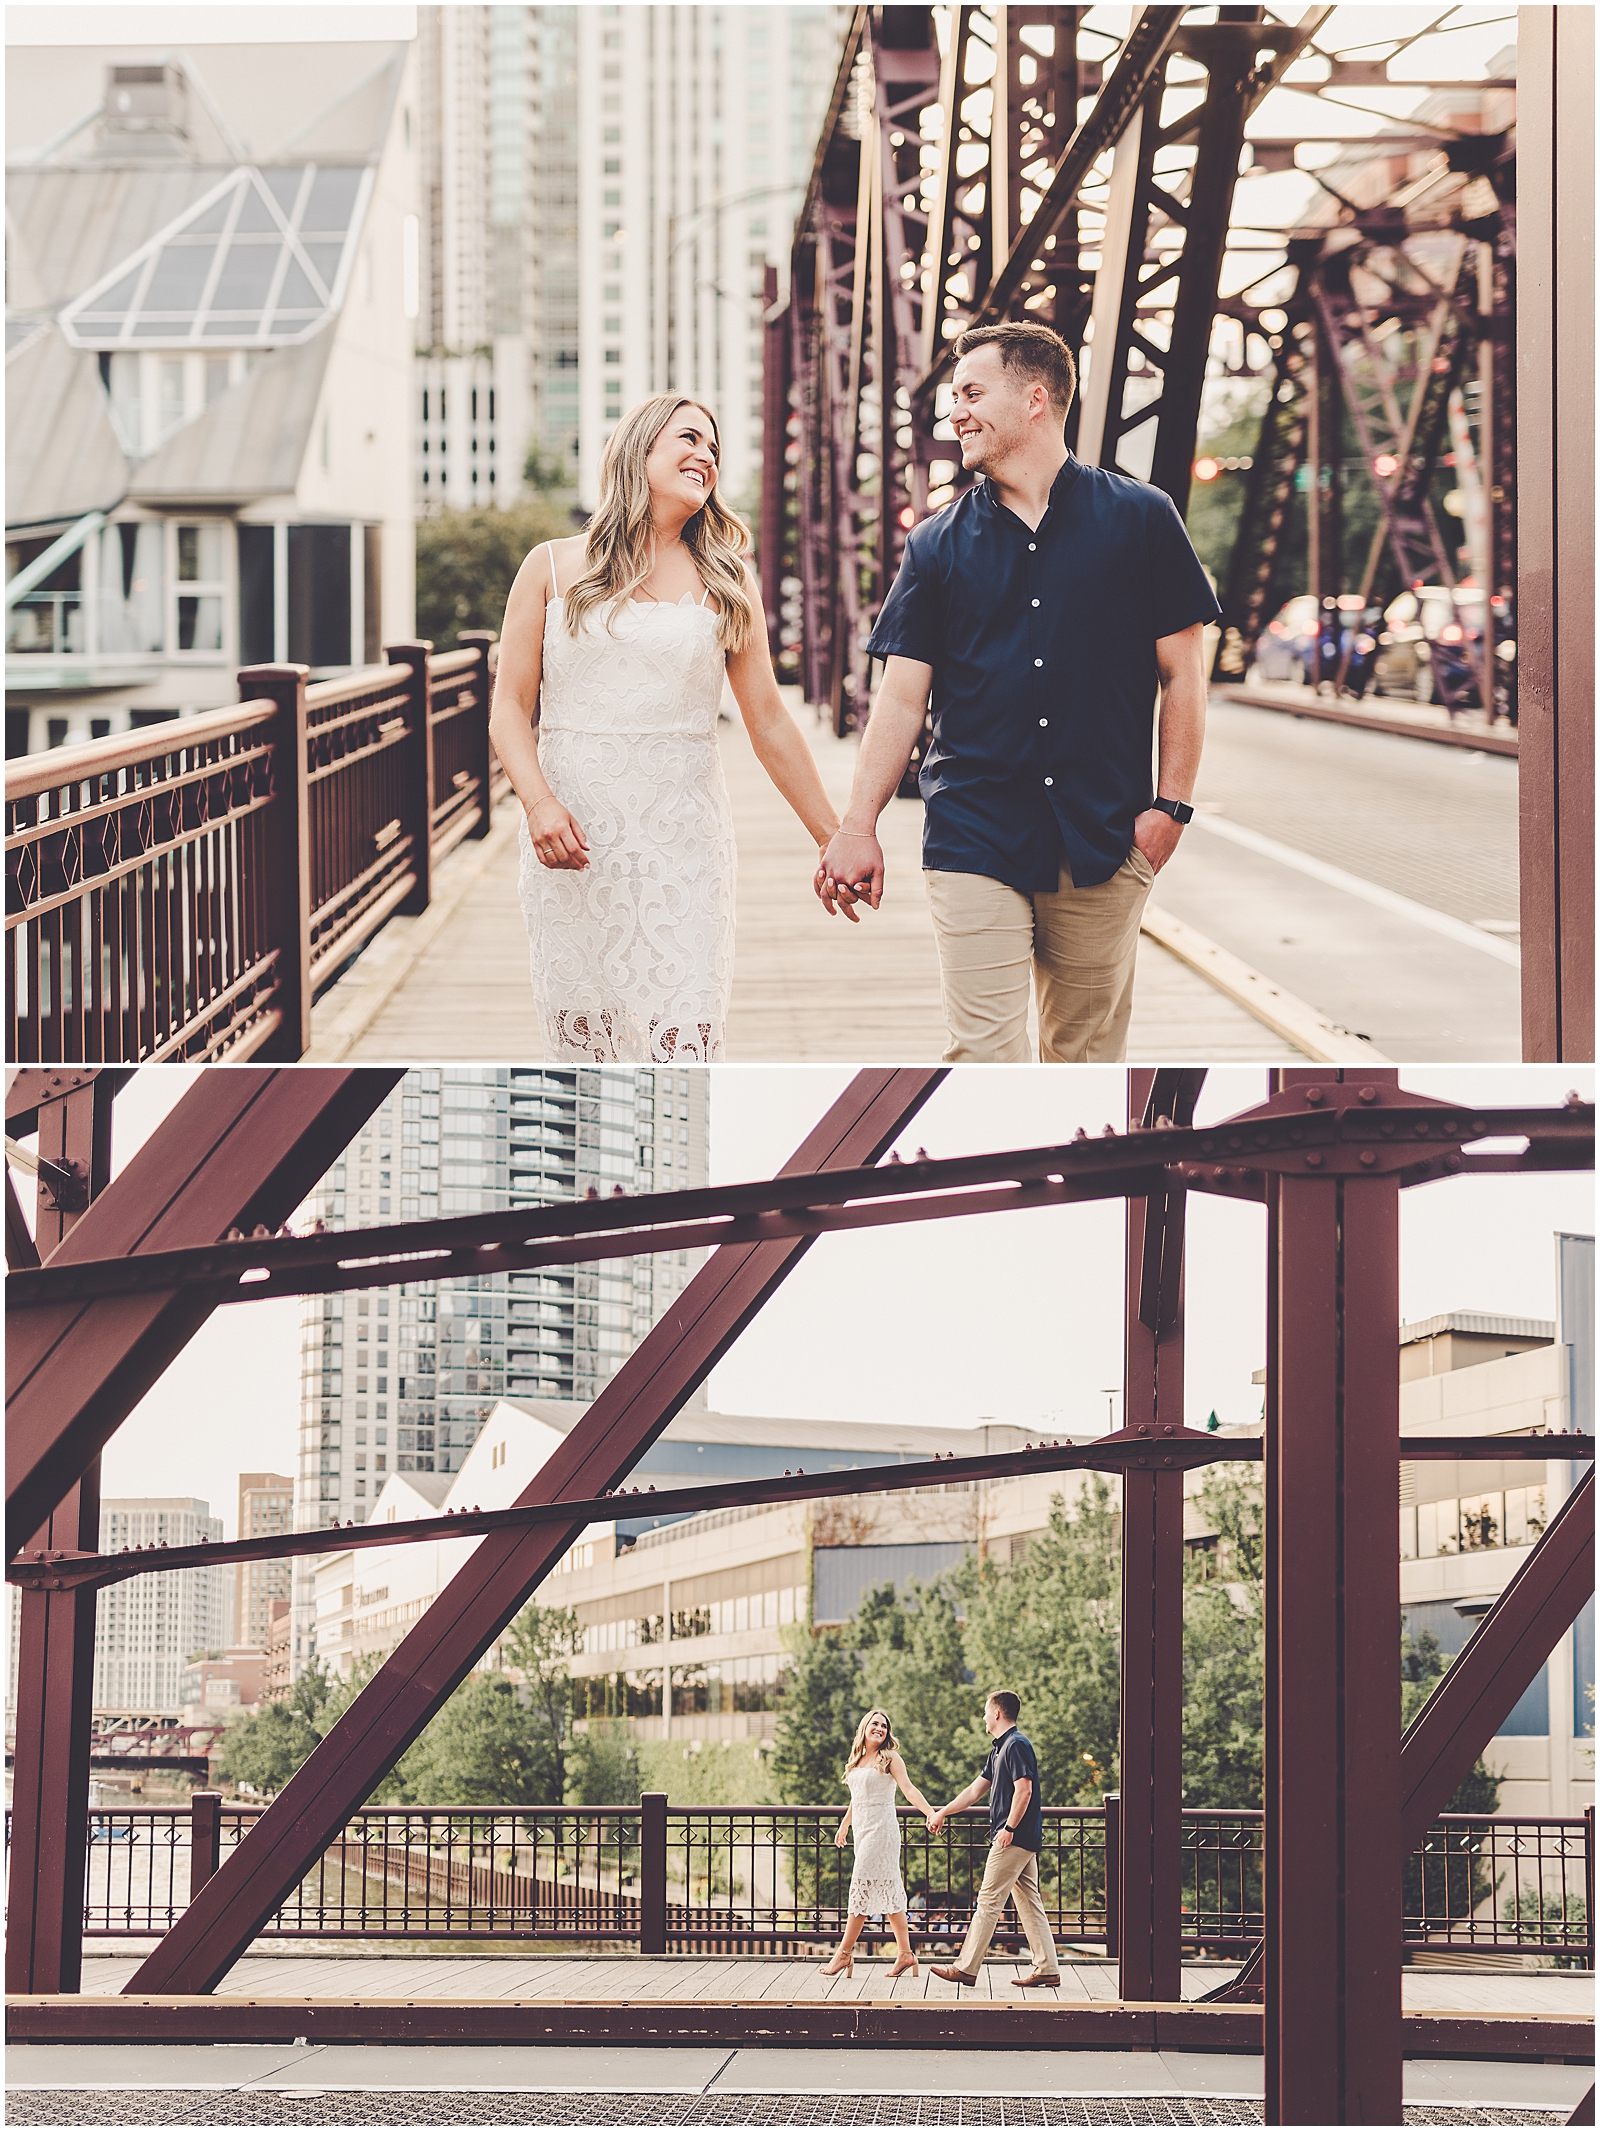 Michele and Timmy's summer River West engagement photos with Chicagoland wedding photographer Kara Evans Photographer.